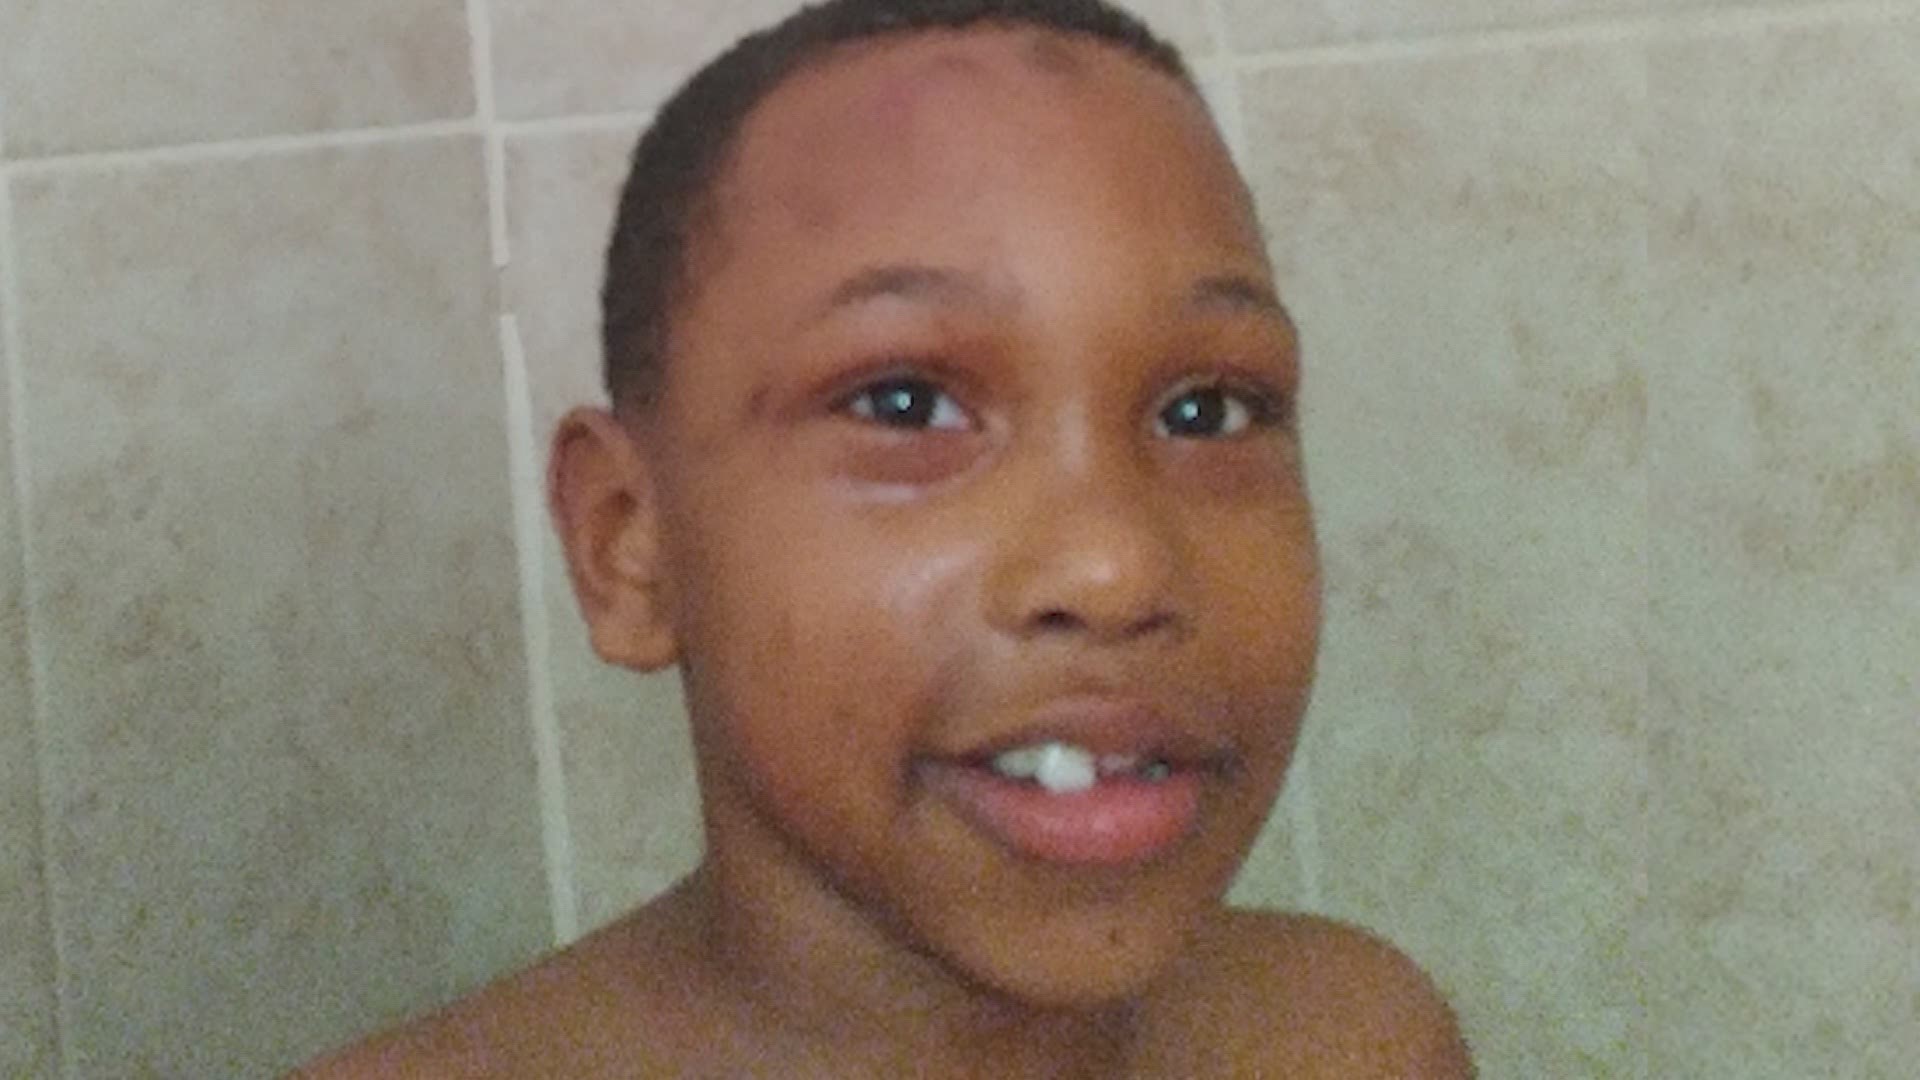 Keydall Jones, 8, went missing Friday morning. His family confirmed Saturday that his body was found in a nearby apartment pool.